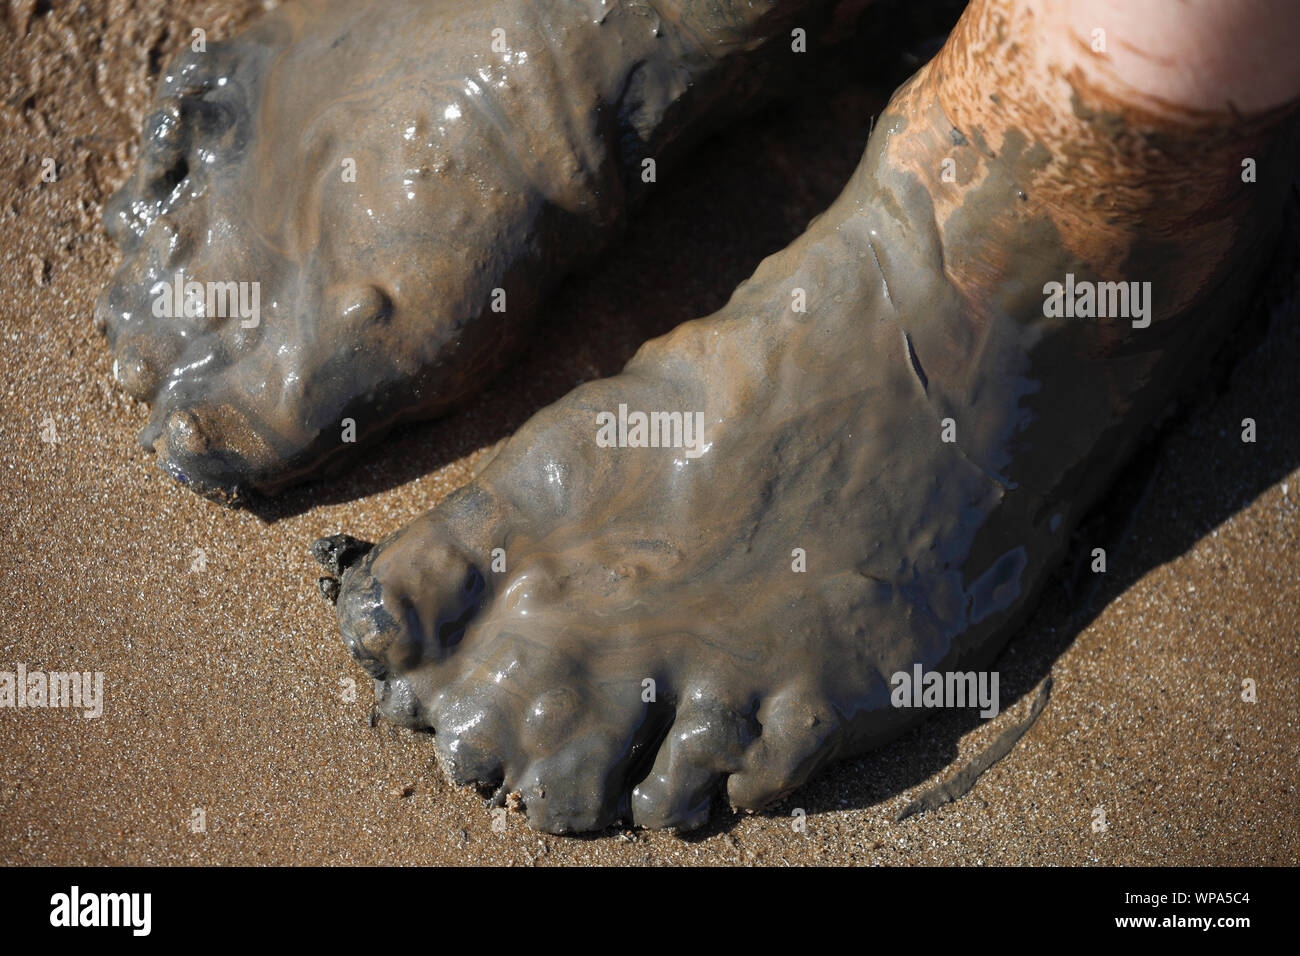 Feet covered in slimy muddy mud on a beach. Stock Photo